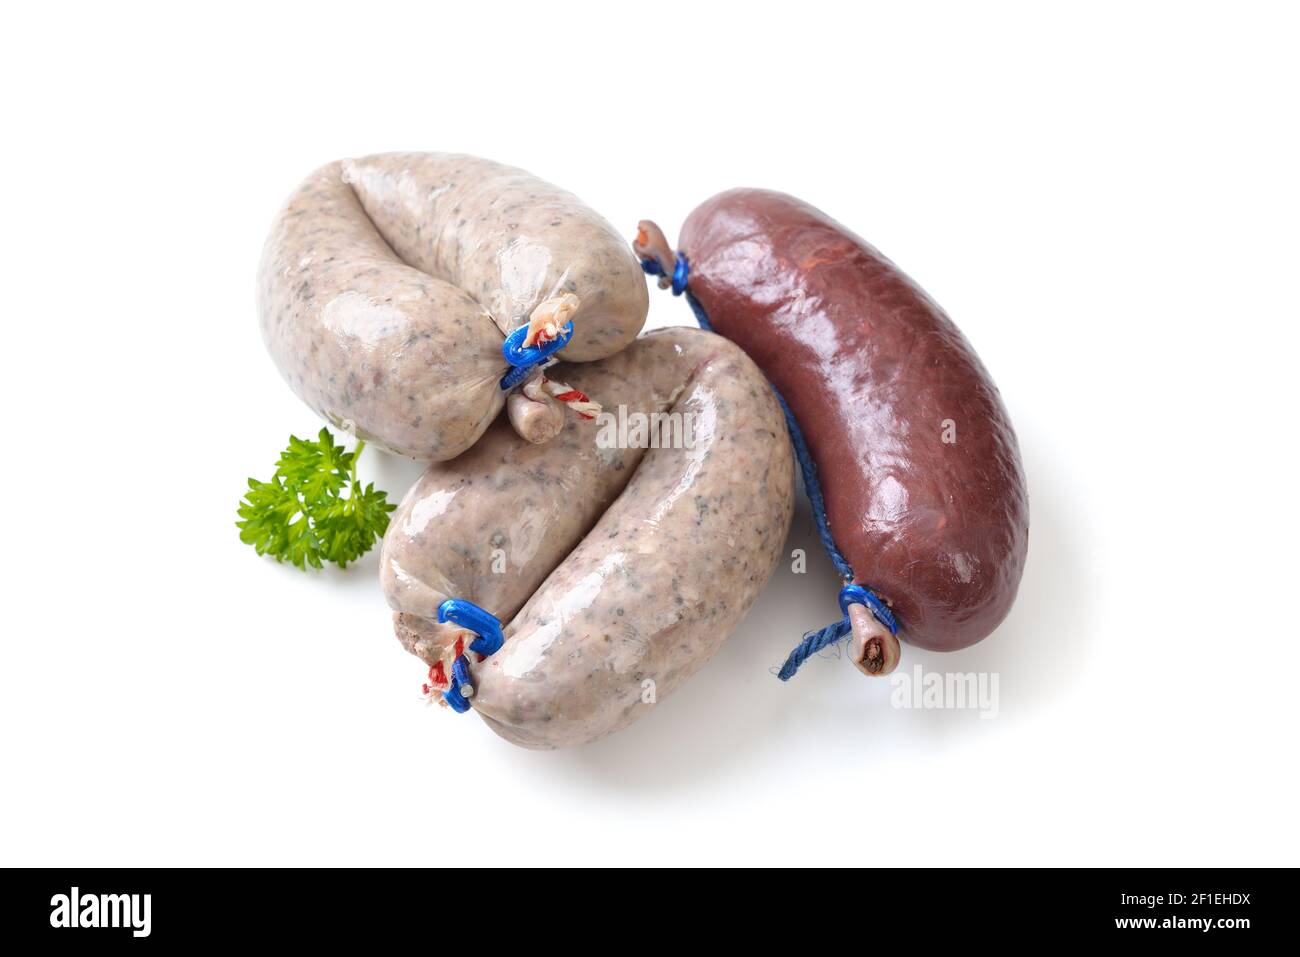 Fresh Bavarian blood and liver sausages, such as those used for hearty German meat platters, on white background Stock Photo